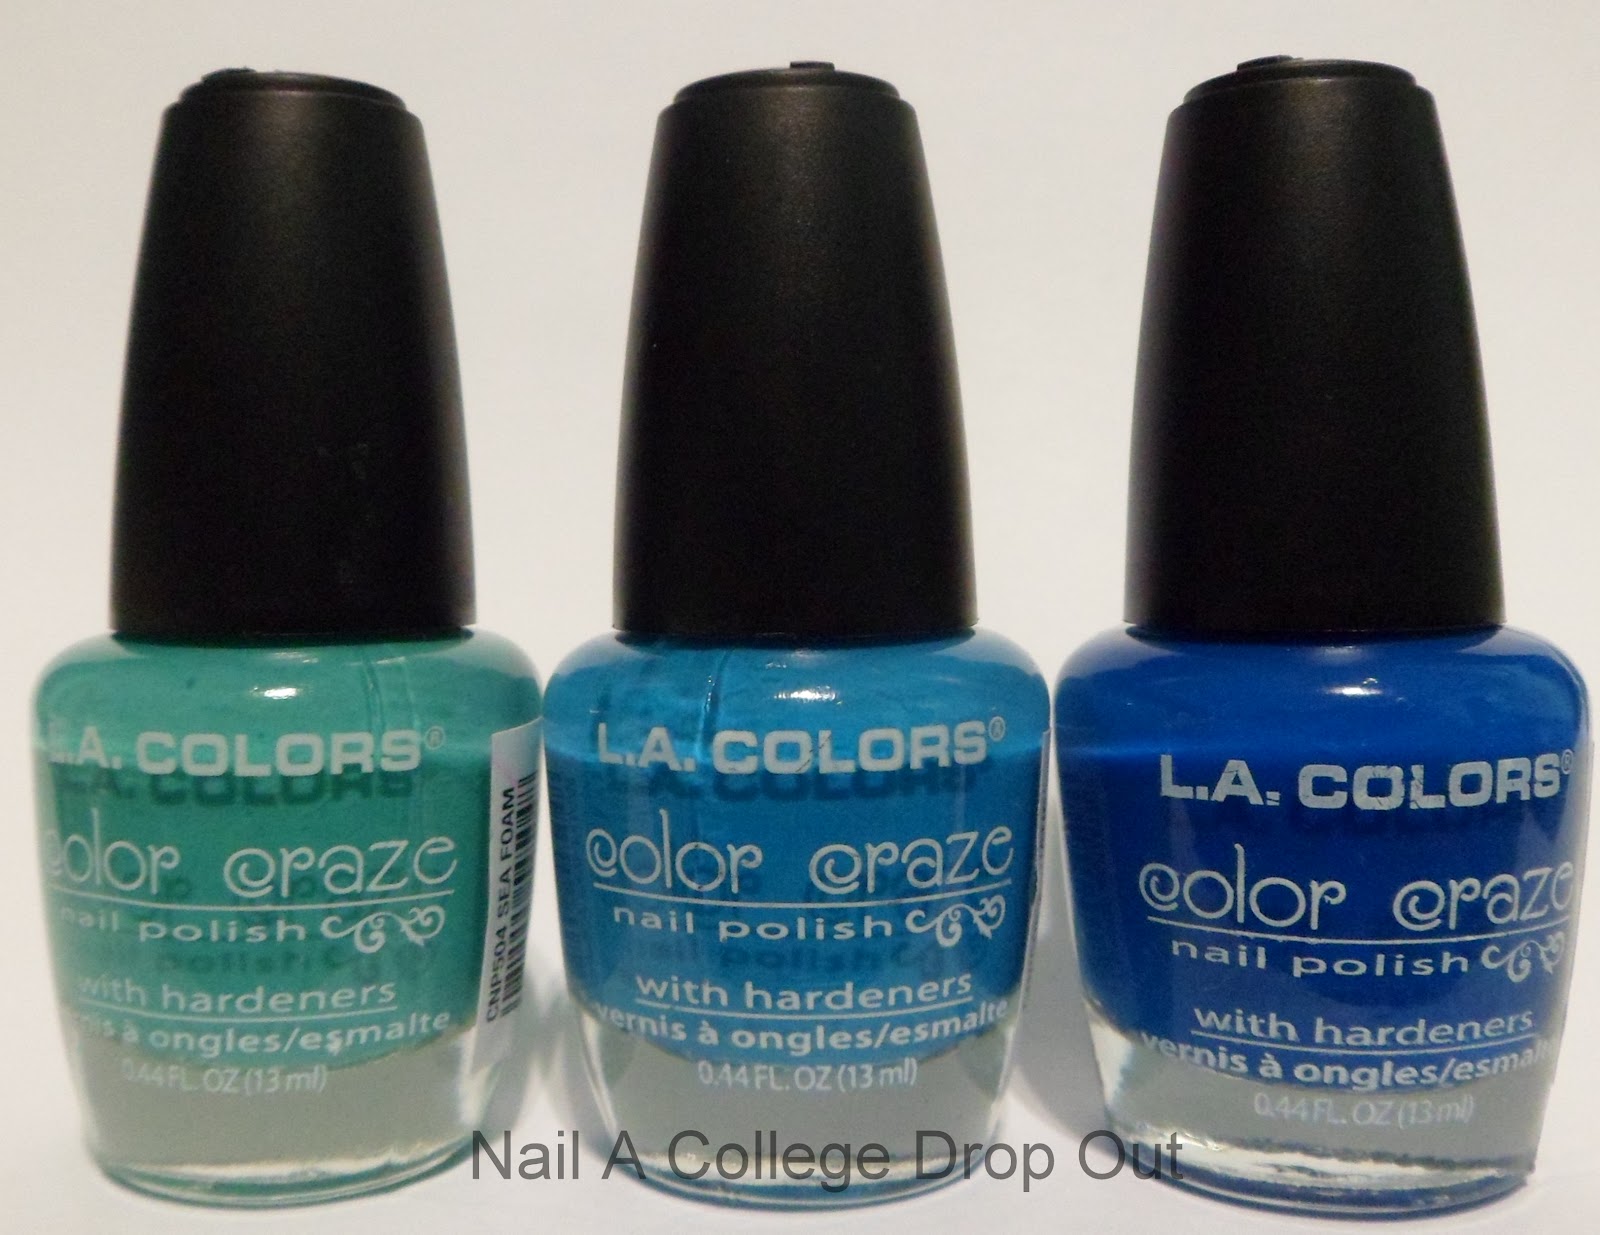 1. L.A. Colors Color Craze Nail Polish with Hardener - wide 8